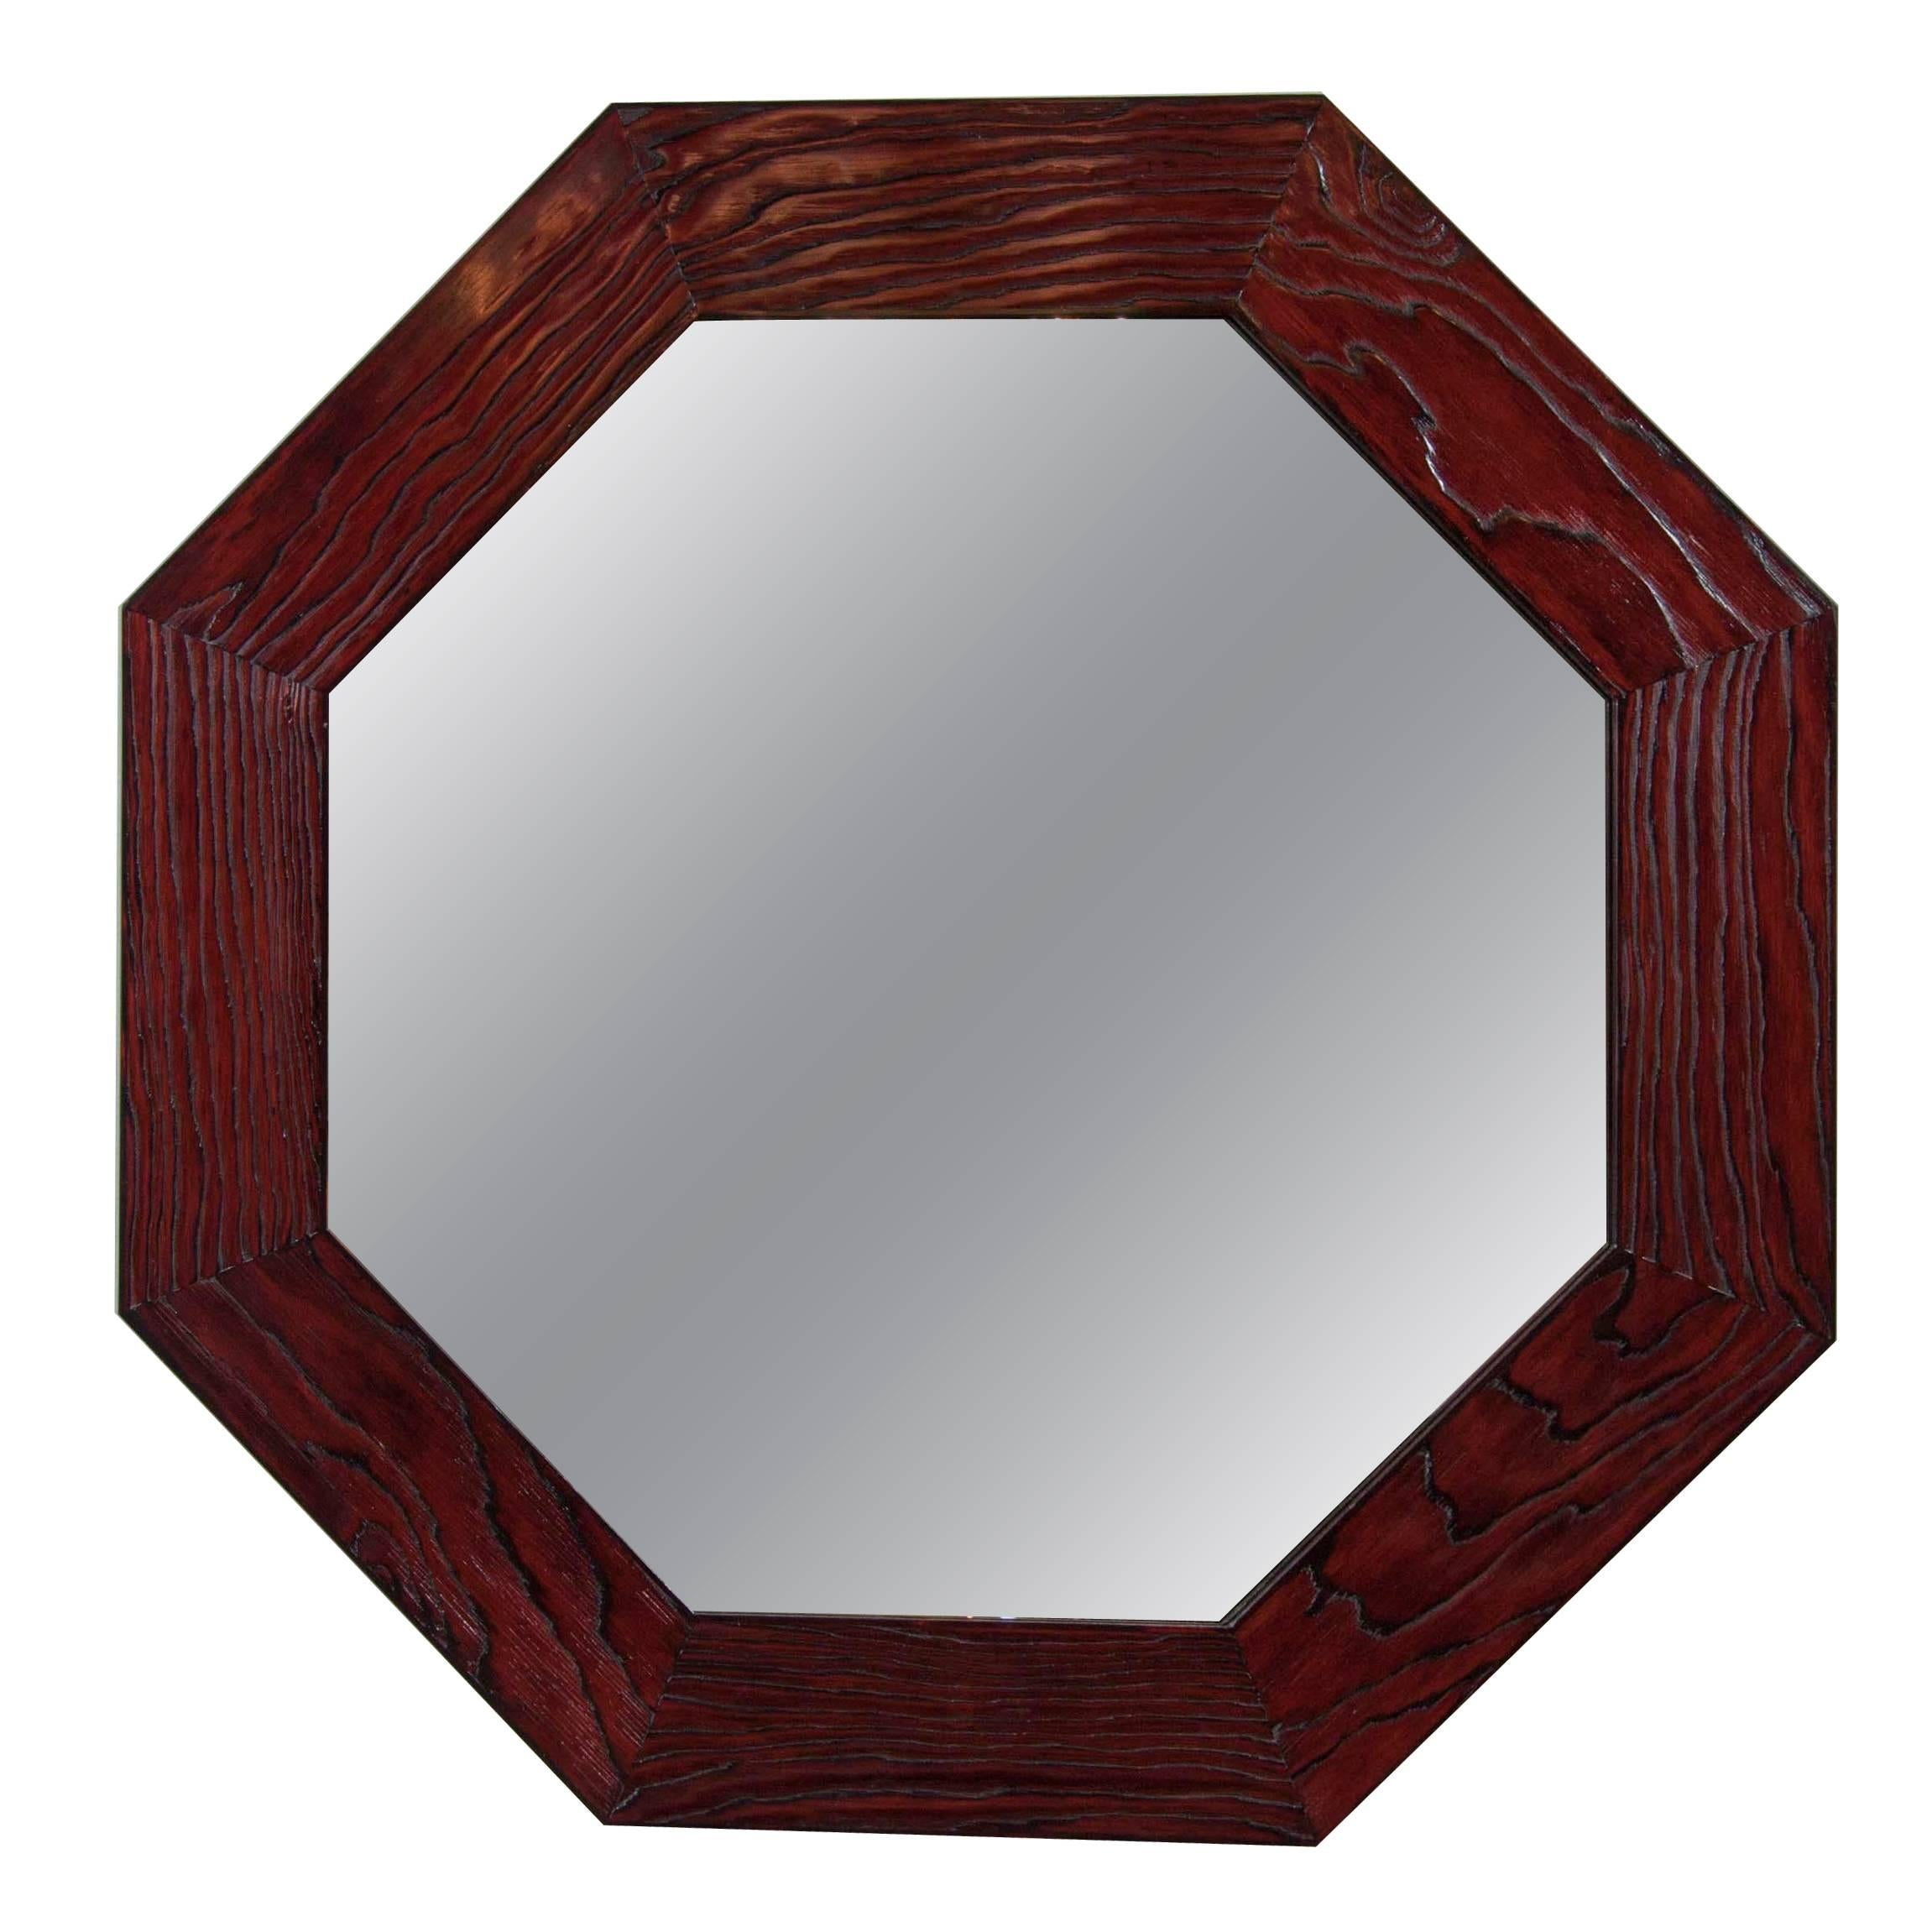 Large Scale Octagonal Mirrors inspired by Eileen Gray